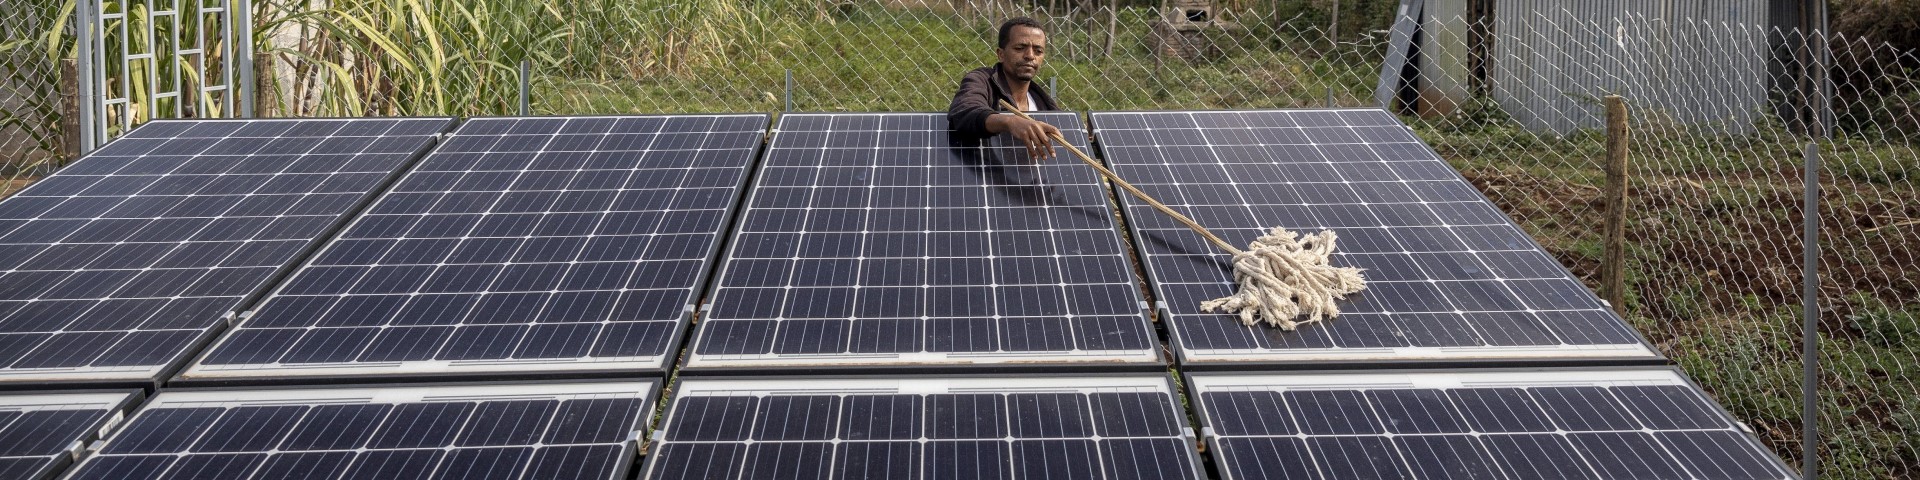 A man removes dust from solar panels at a health centre in Ethiopia. © GIZ